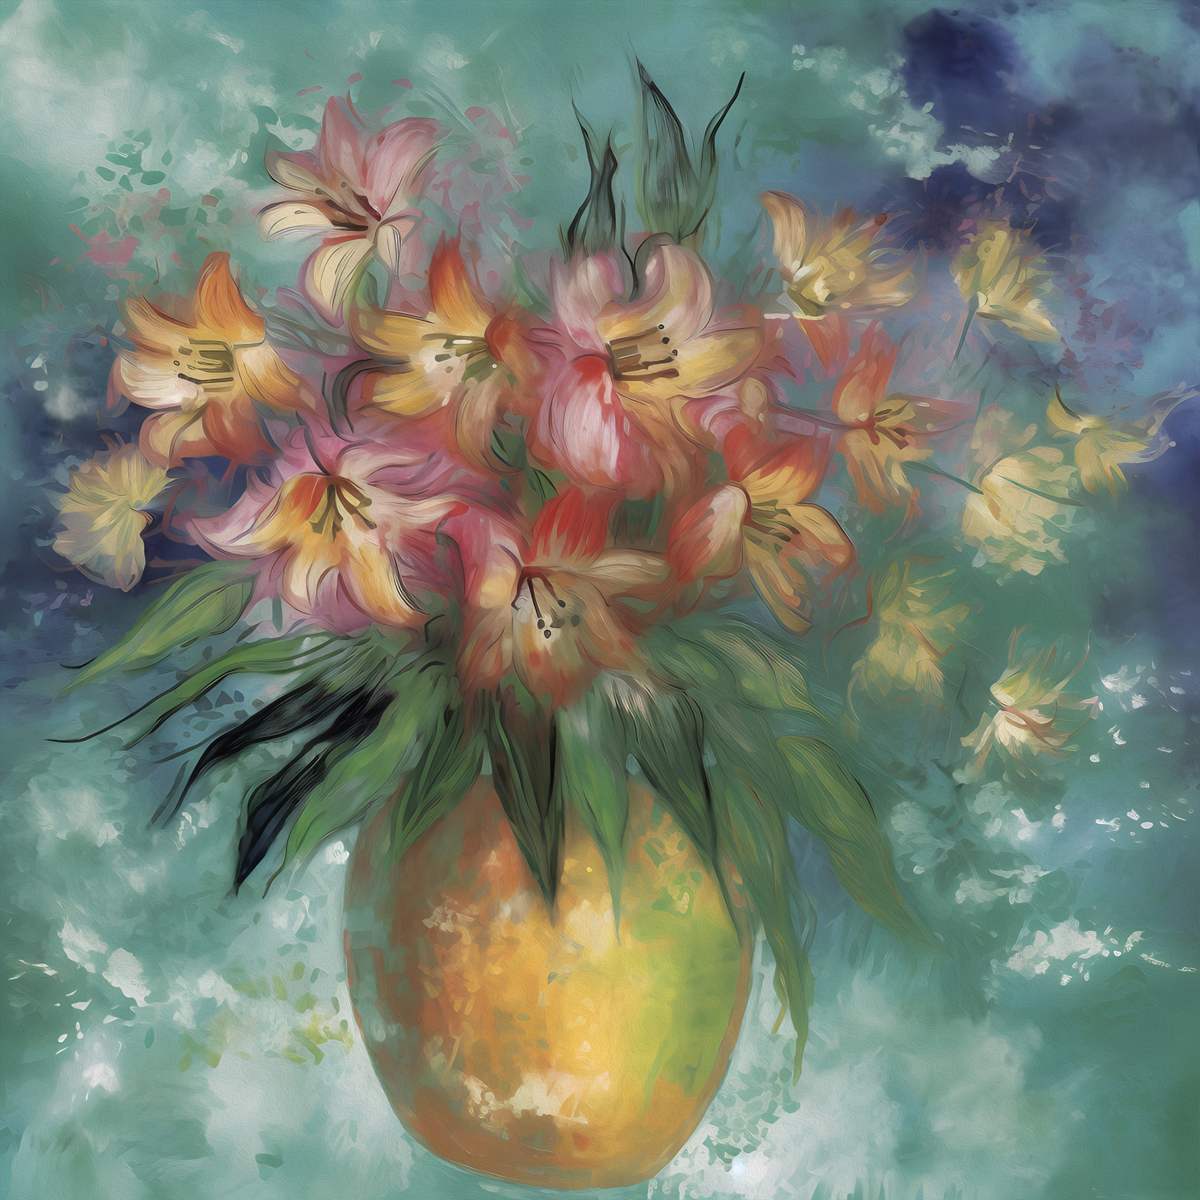  Radiant Blooms: 'Pink And Yellow Bouquet' Art Collection - Art Print on Canvas. Artemyst